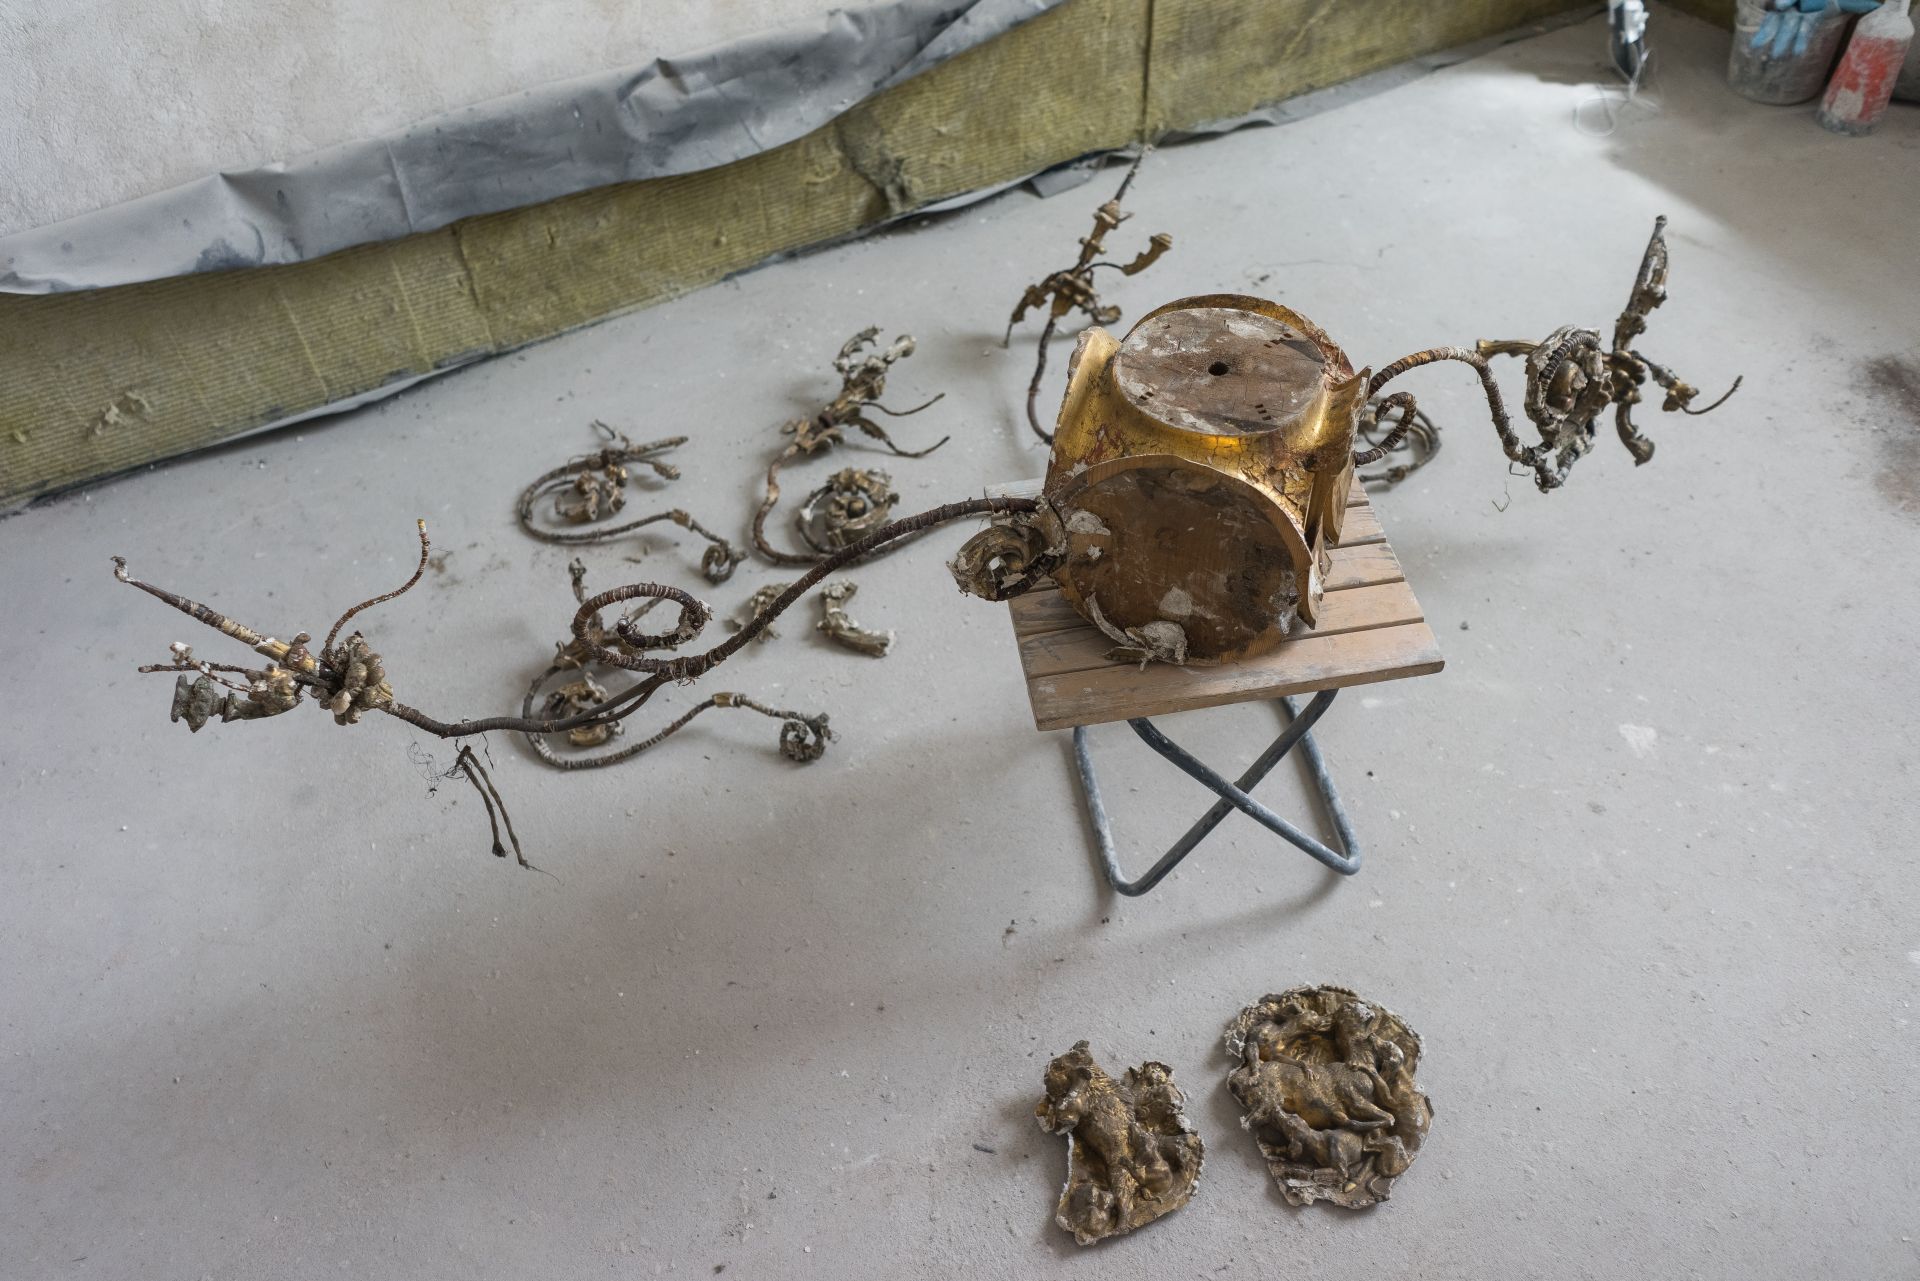 Fragments of the chandelier found in the former Pac Palace. Photo by Povilas Jarmala, 2017